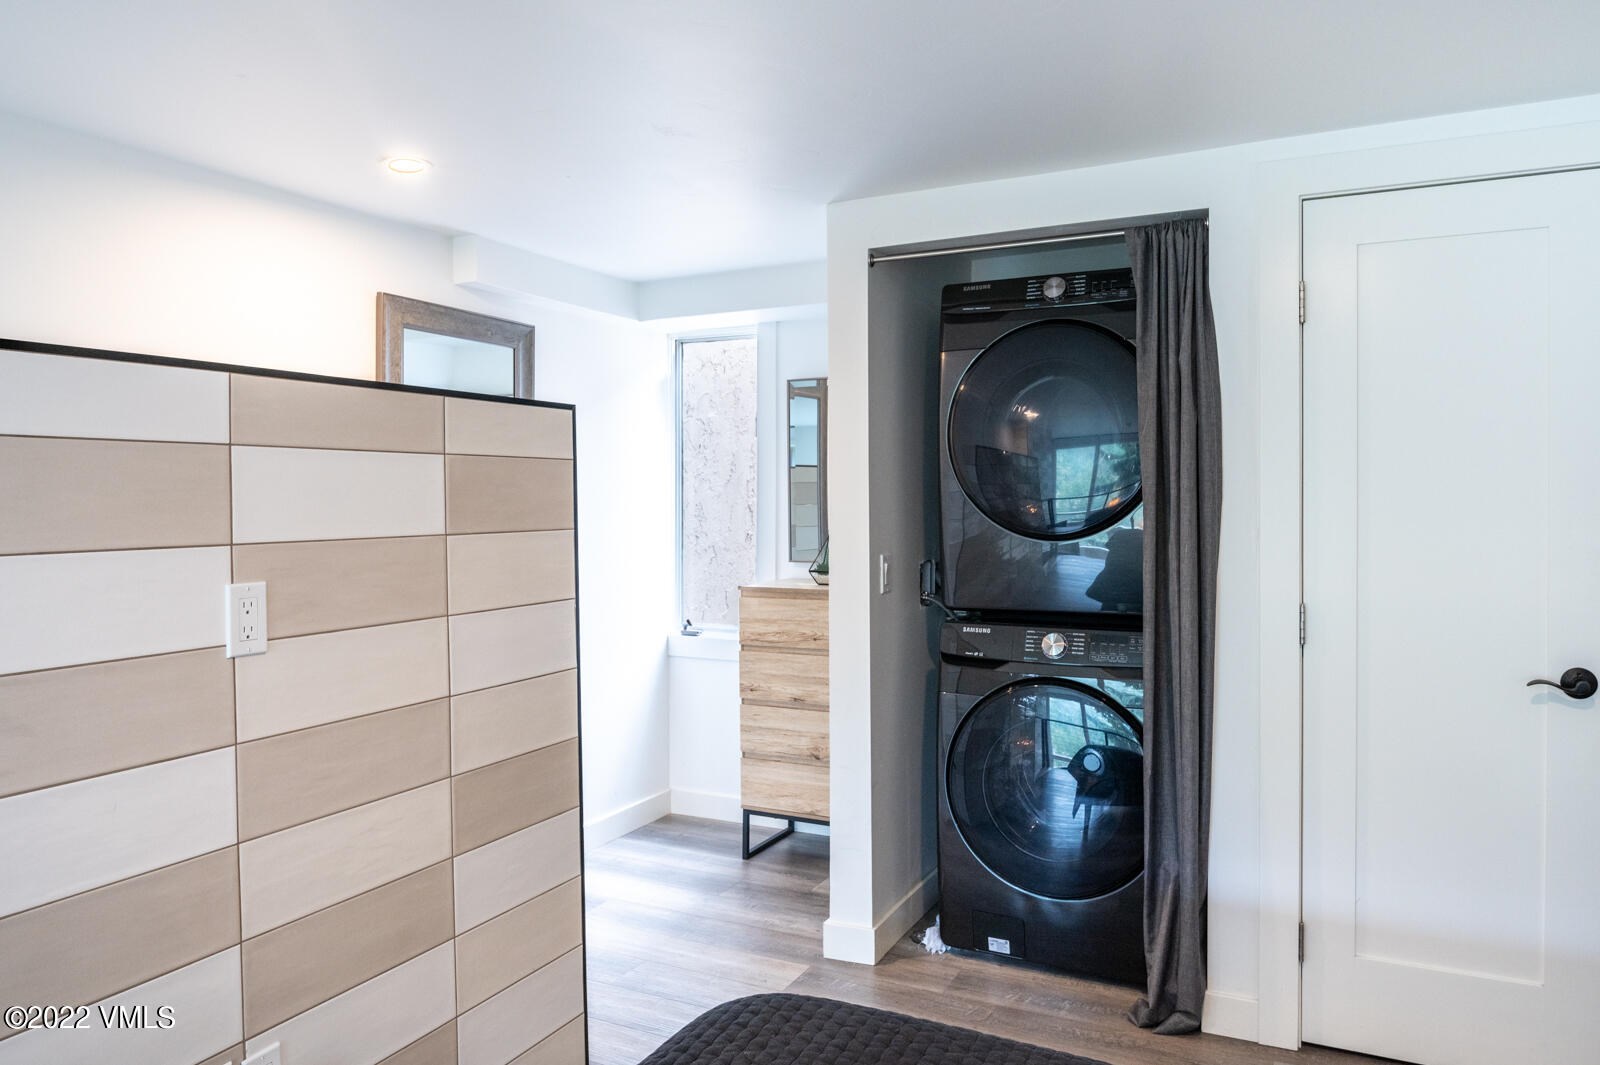 Apartment Living Made Spectacular with Stackable Washer and Dryer